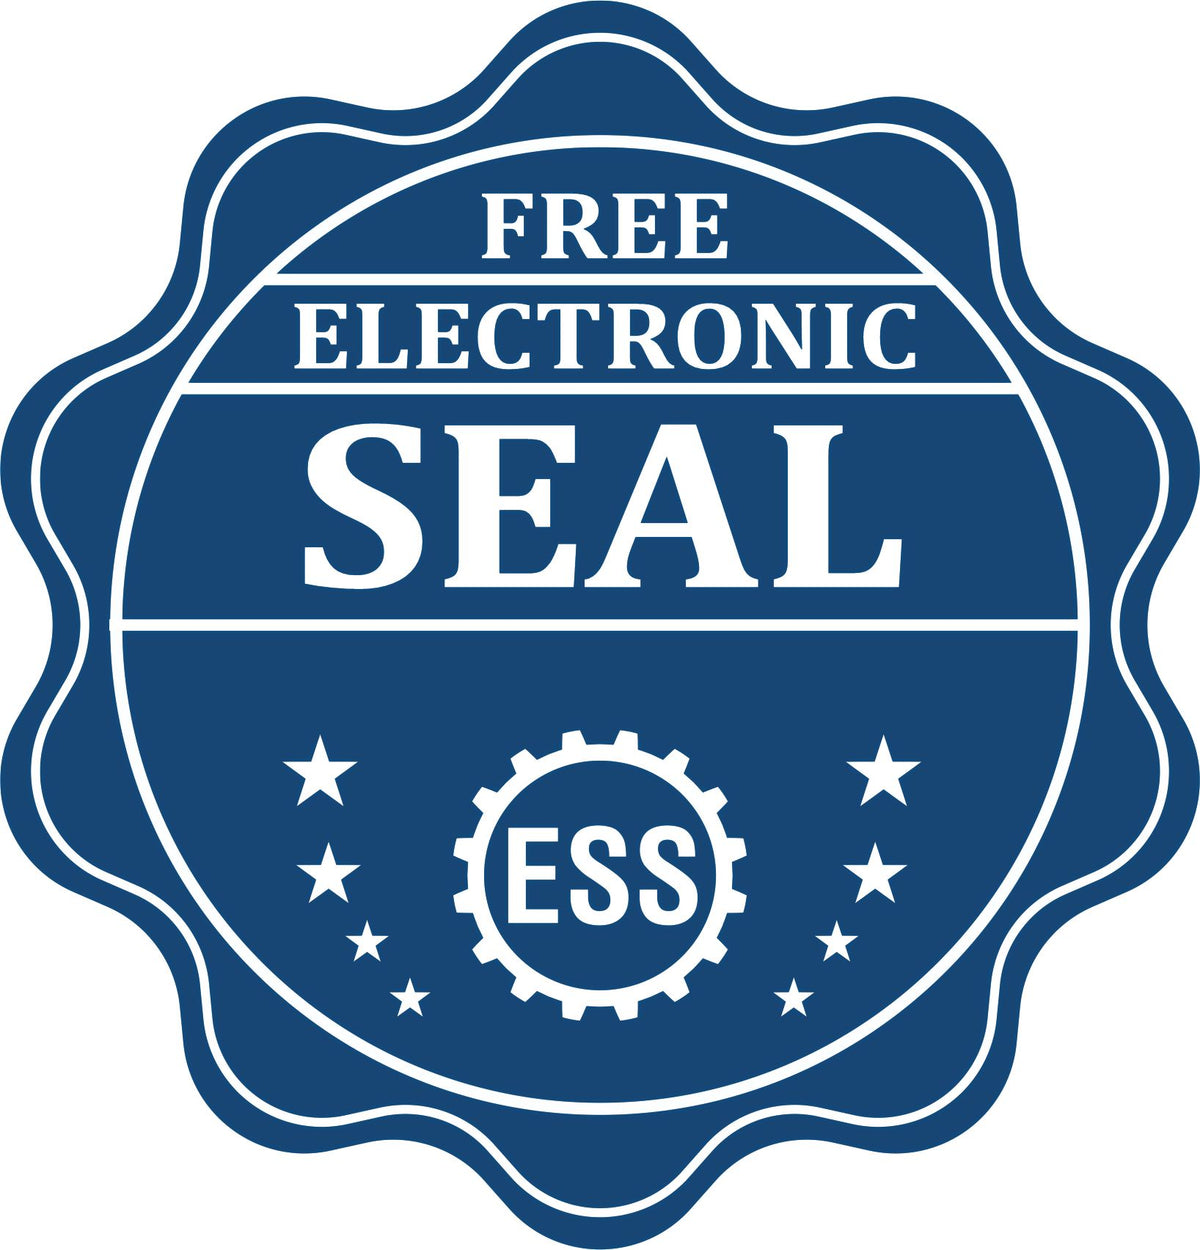 A badge showing a free electronic seal for the Heavy Duty Cast Iron Delaware Architect Embosser with stars and the ESS gear on the emblem.